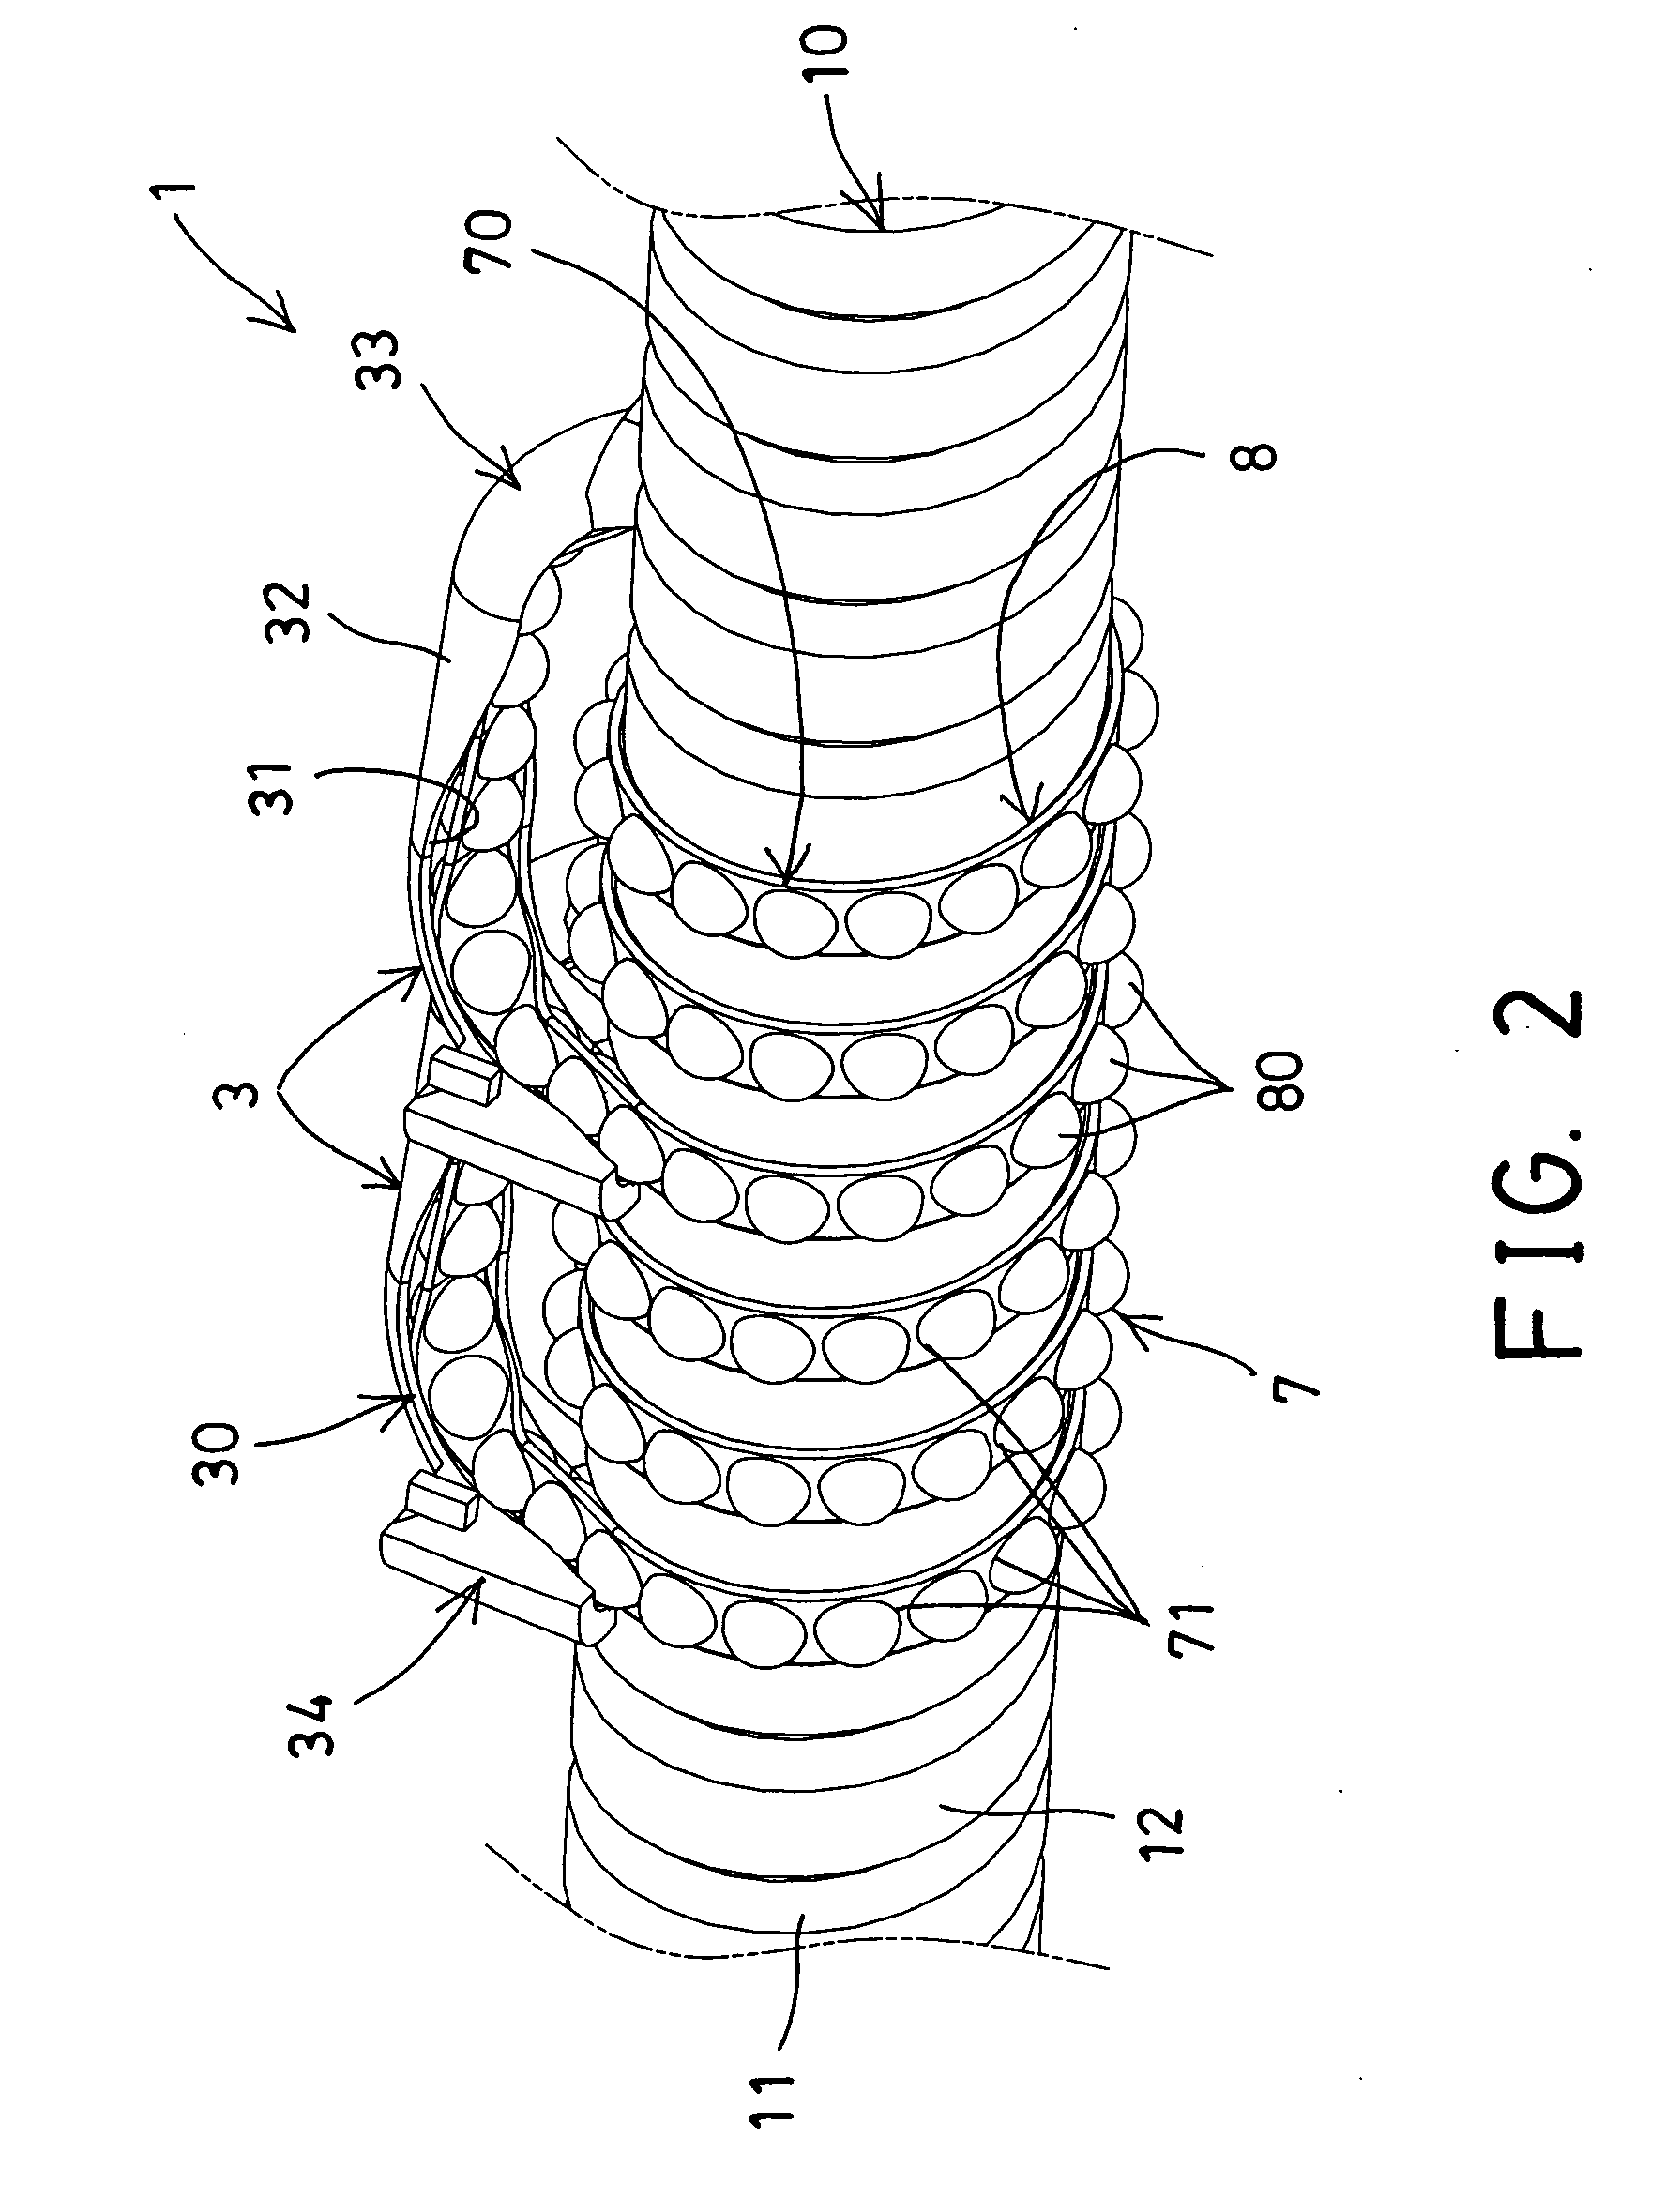 Circulating device for motion guide apparatus